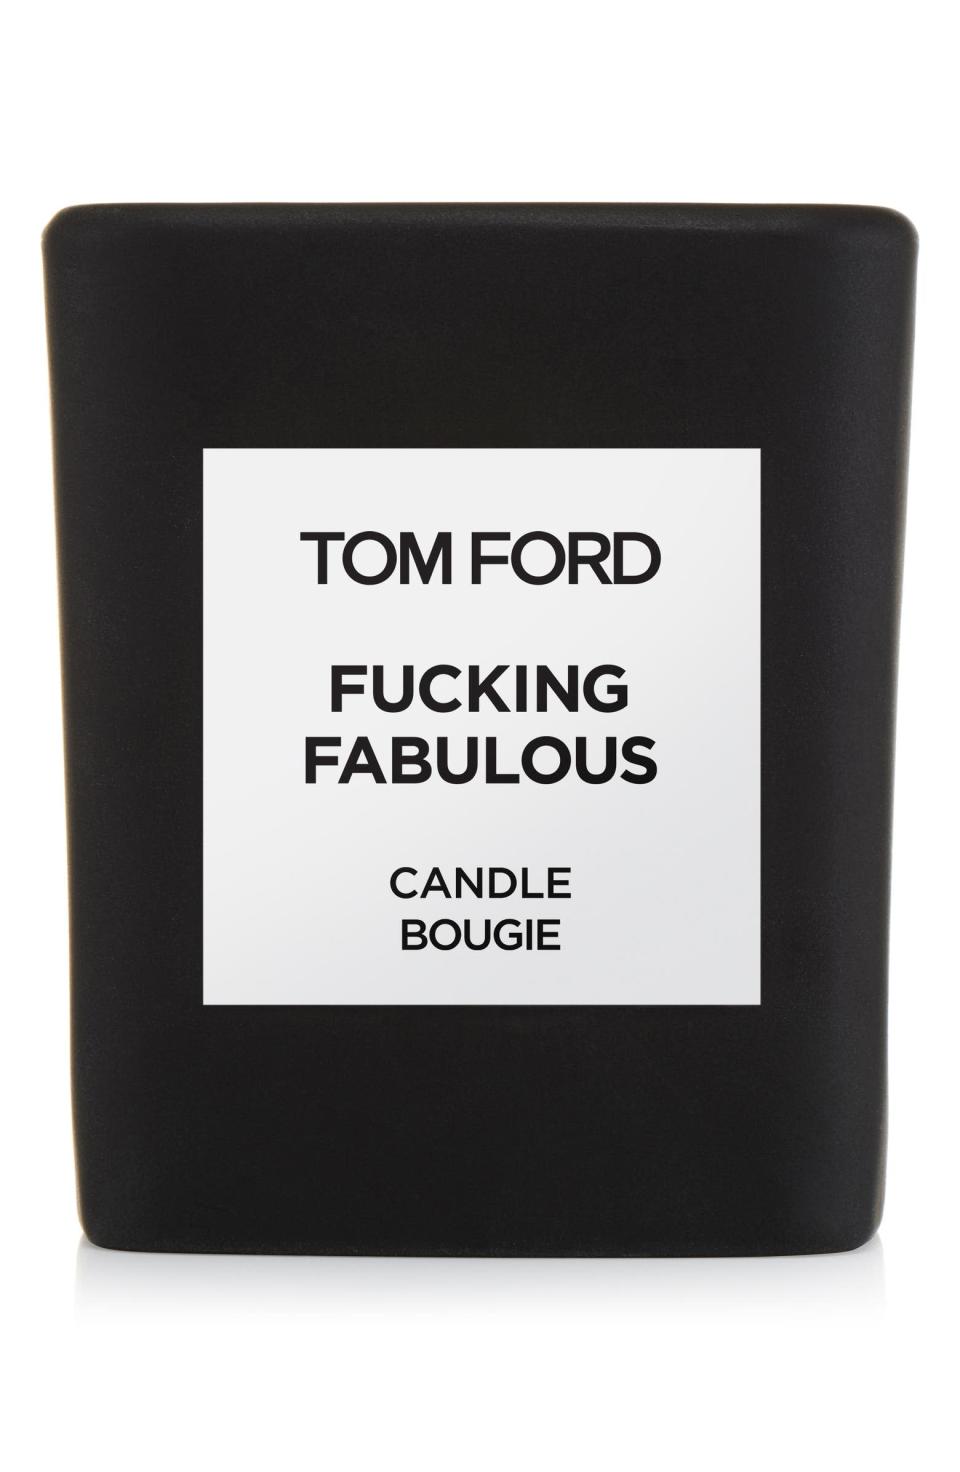 <h2>15% Off Tom Ford Fabulous Candle</h2><br>If your giftee is a fragrance snob — aka they already own every single perfume they could possibly want — then the answer to your gifting prayers is this, well, f*cking fabulous Tom Ford candle.<br><br><em>Shop <strong><a href="https://www.nordstrom.com/brands/tom-ford--5113/home/home-fragrance?breadcrumb=Home%2FBrands%2FTom%20Ford--5113%2FHome%2FHome%20Fragrance" rel="nofollow noopener" target="_blank" data-ylk="slk:Tom Ford Candles On Sale" class="link rapid-noclick-resp">Tom Ford Candles On Sale</a></strong></em><br><br><strong>Tom Ford</strong> Fabulous Candle, $, available at <a href="https://go.skimresources.com/?id=30283X879131&url=https%3A%2F%2Fwww.nordstrom.com%2Fs%2Ftom-ford-fabulous-candle%2F5084903" rel="nofollow noopener" target="_blank" data-ylk="slk:Nordstrom" class="link rapid-noclick-resp">Nordstrom</a>